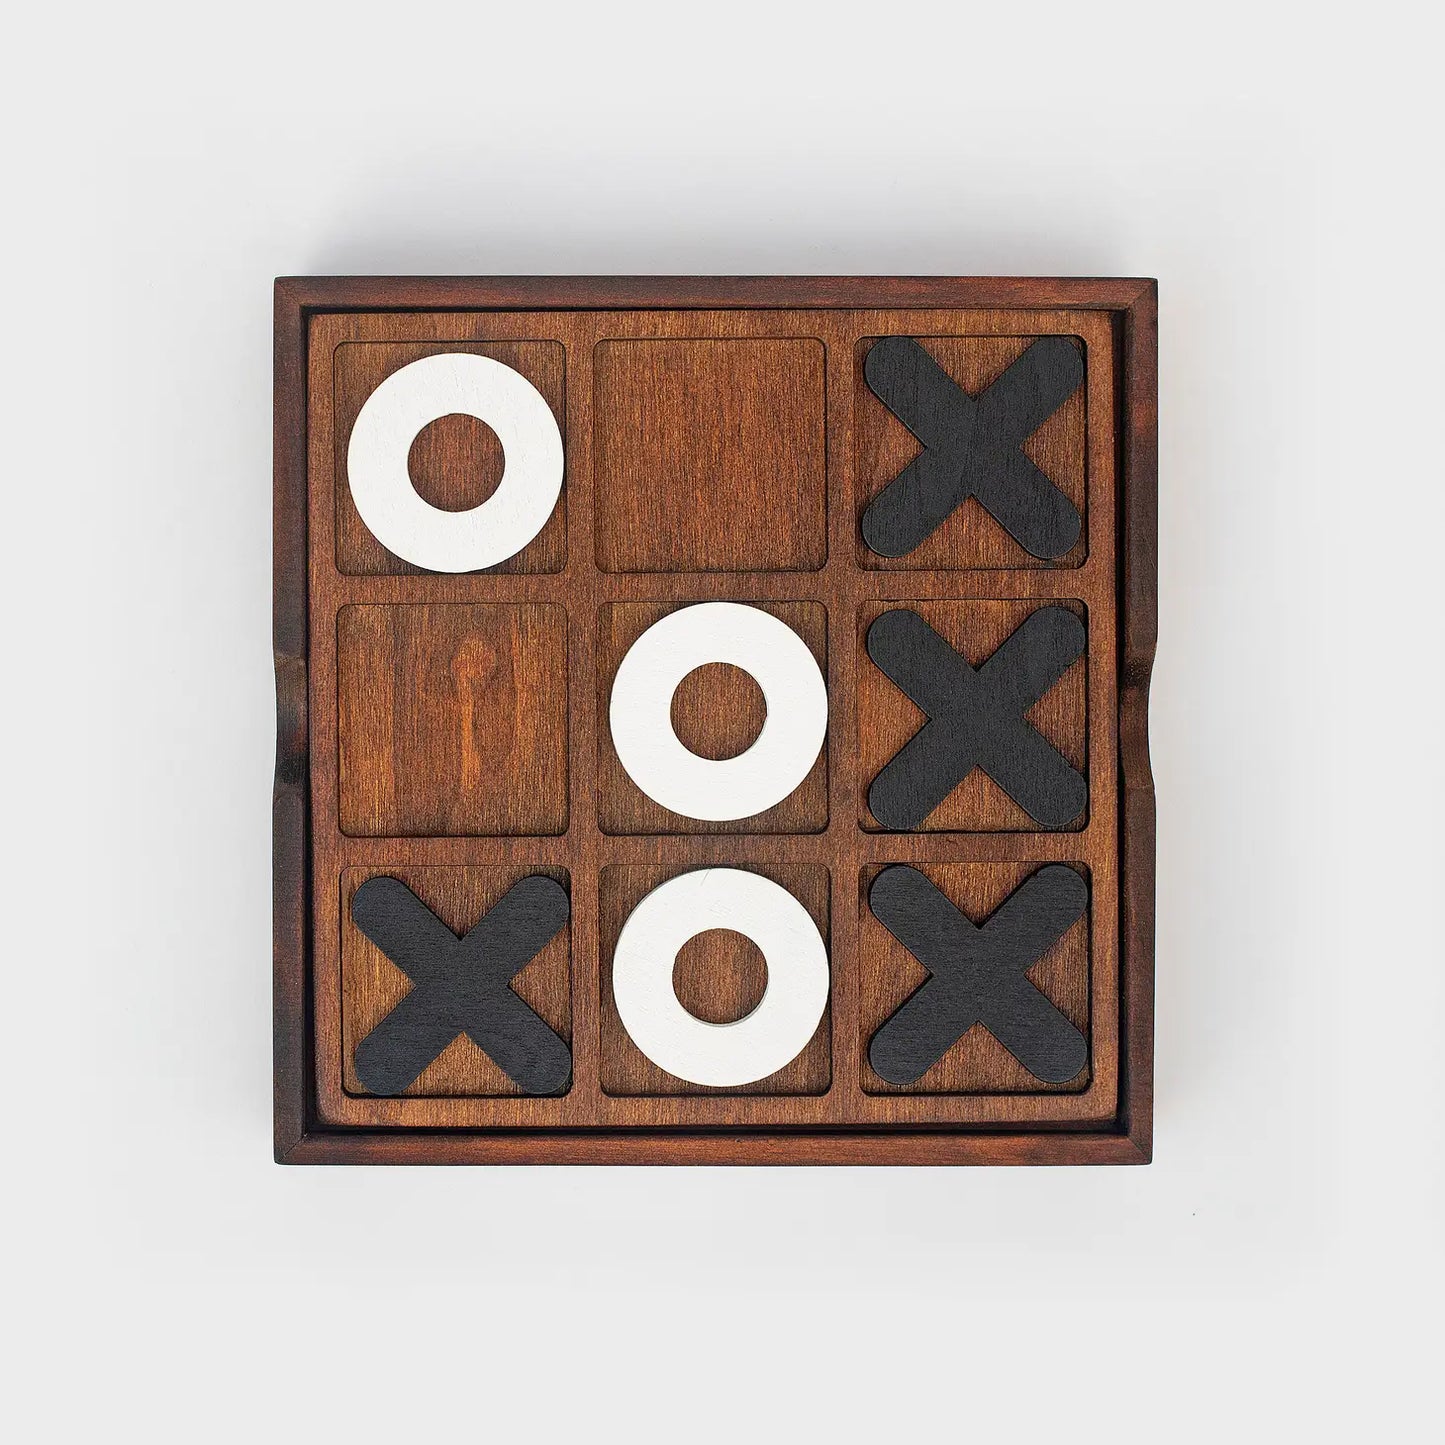 Deluxe wooden Tic-Tac-Toe board